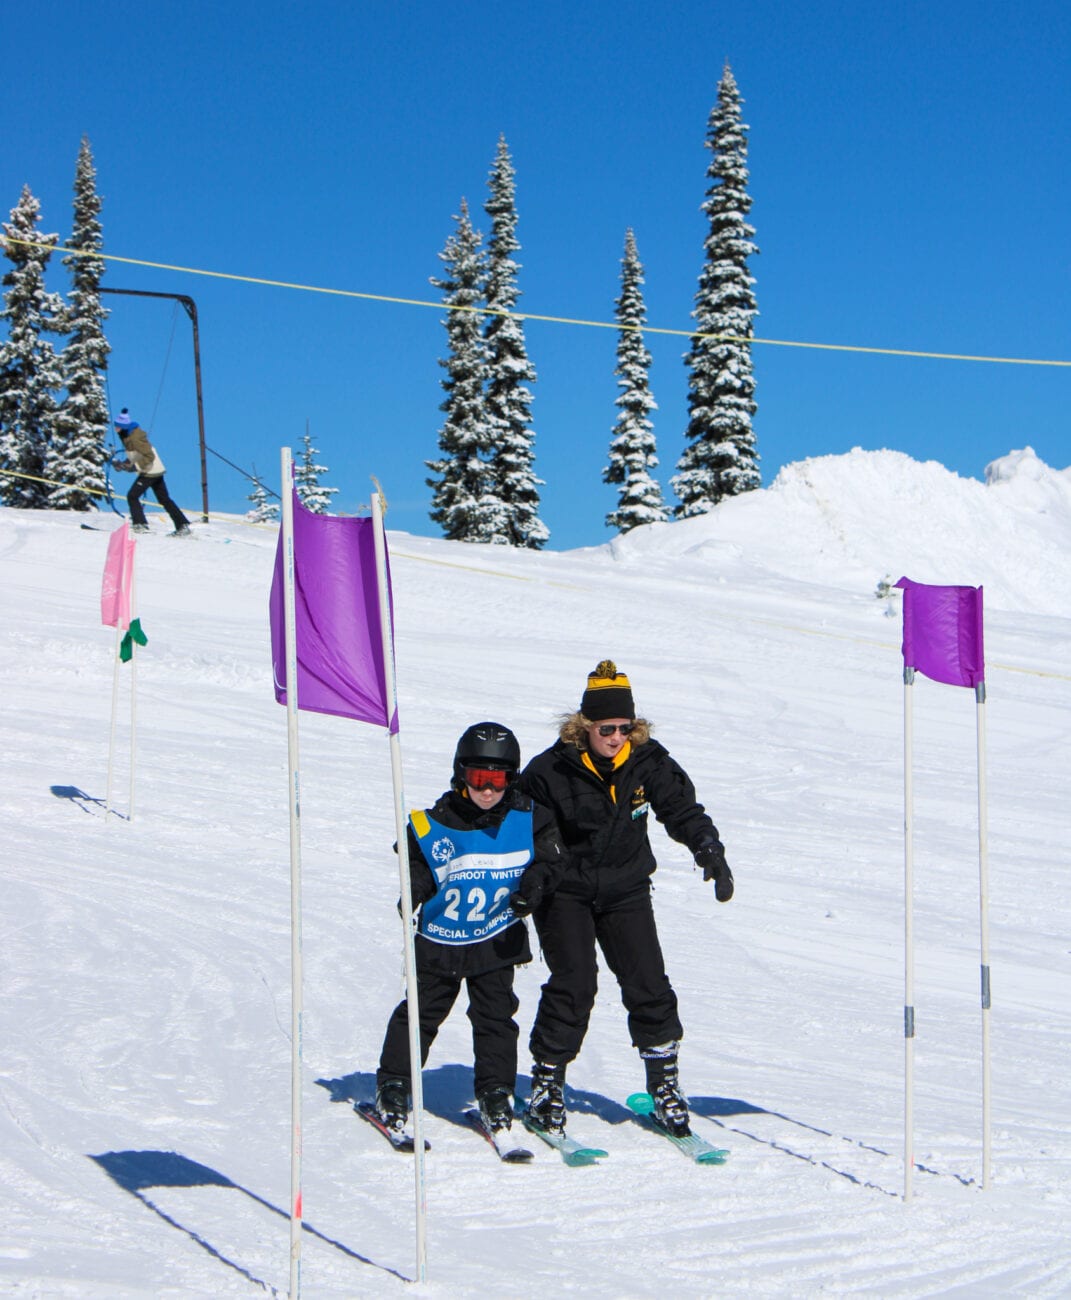 Two people on skis participating in the Winter Special Olympics.